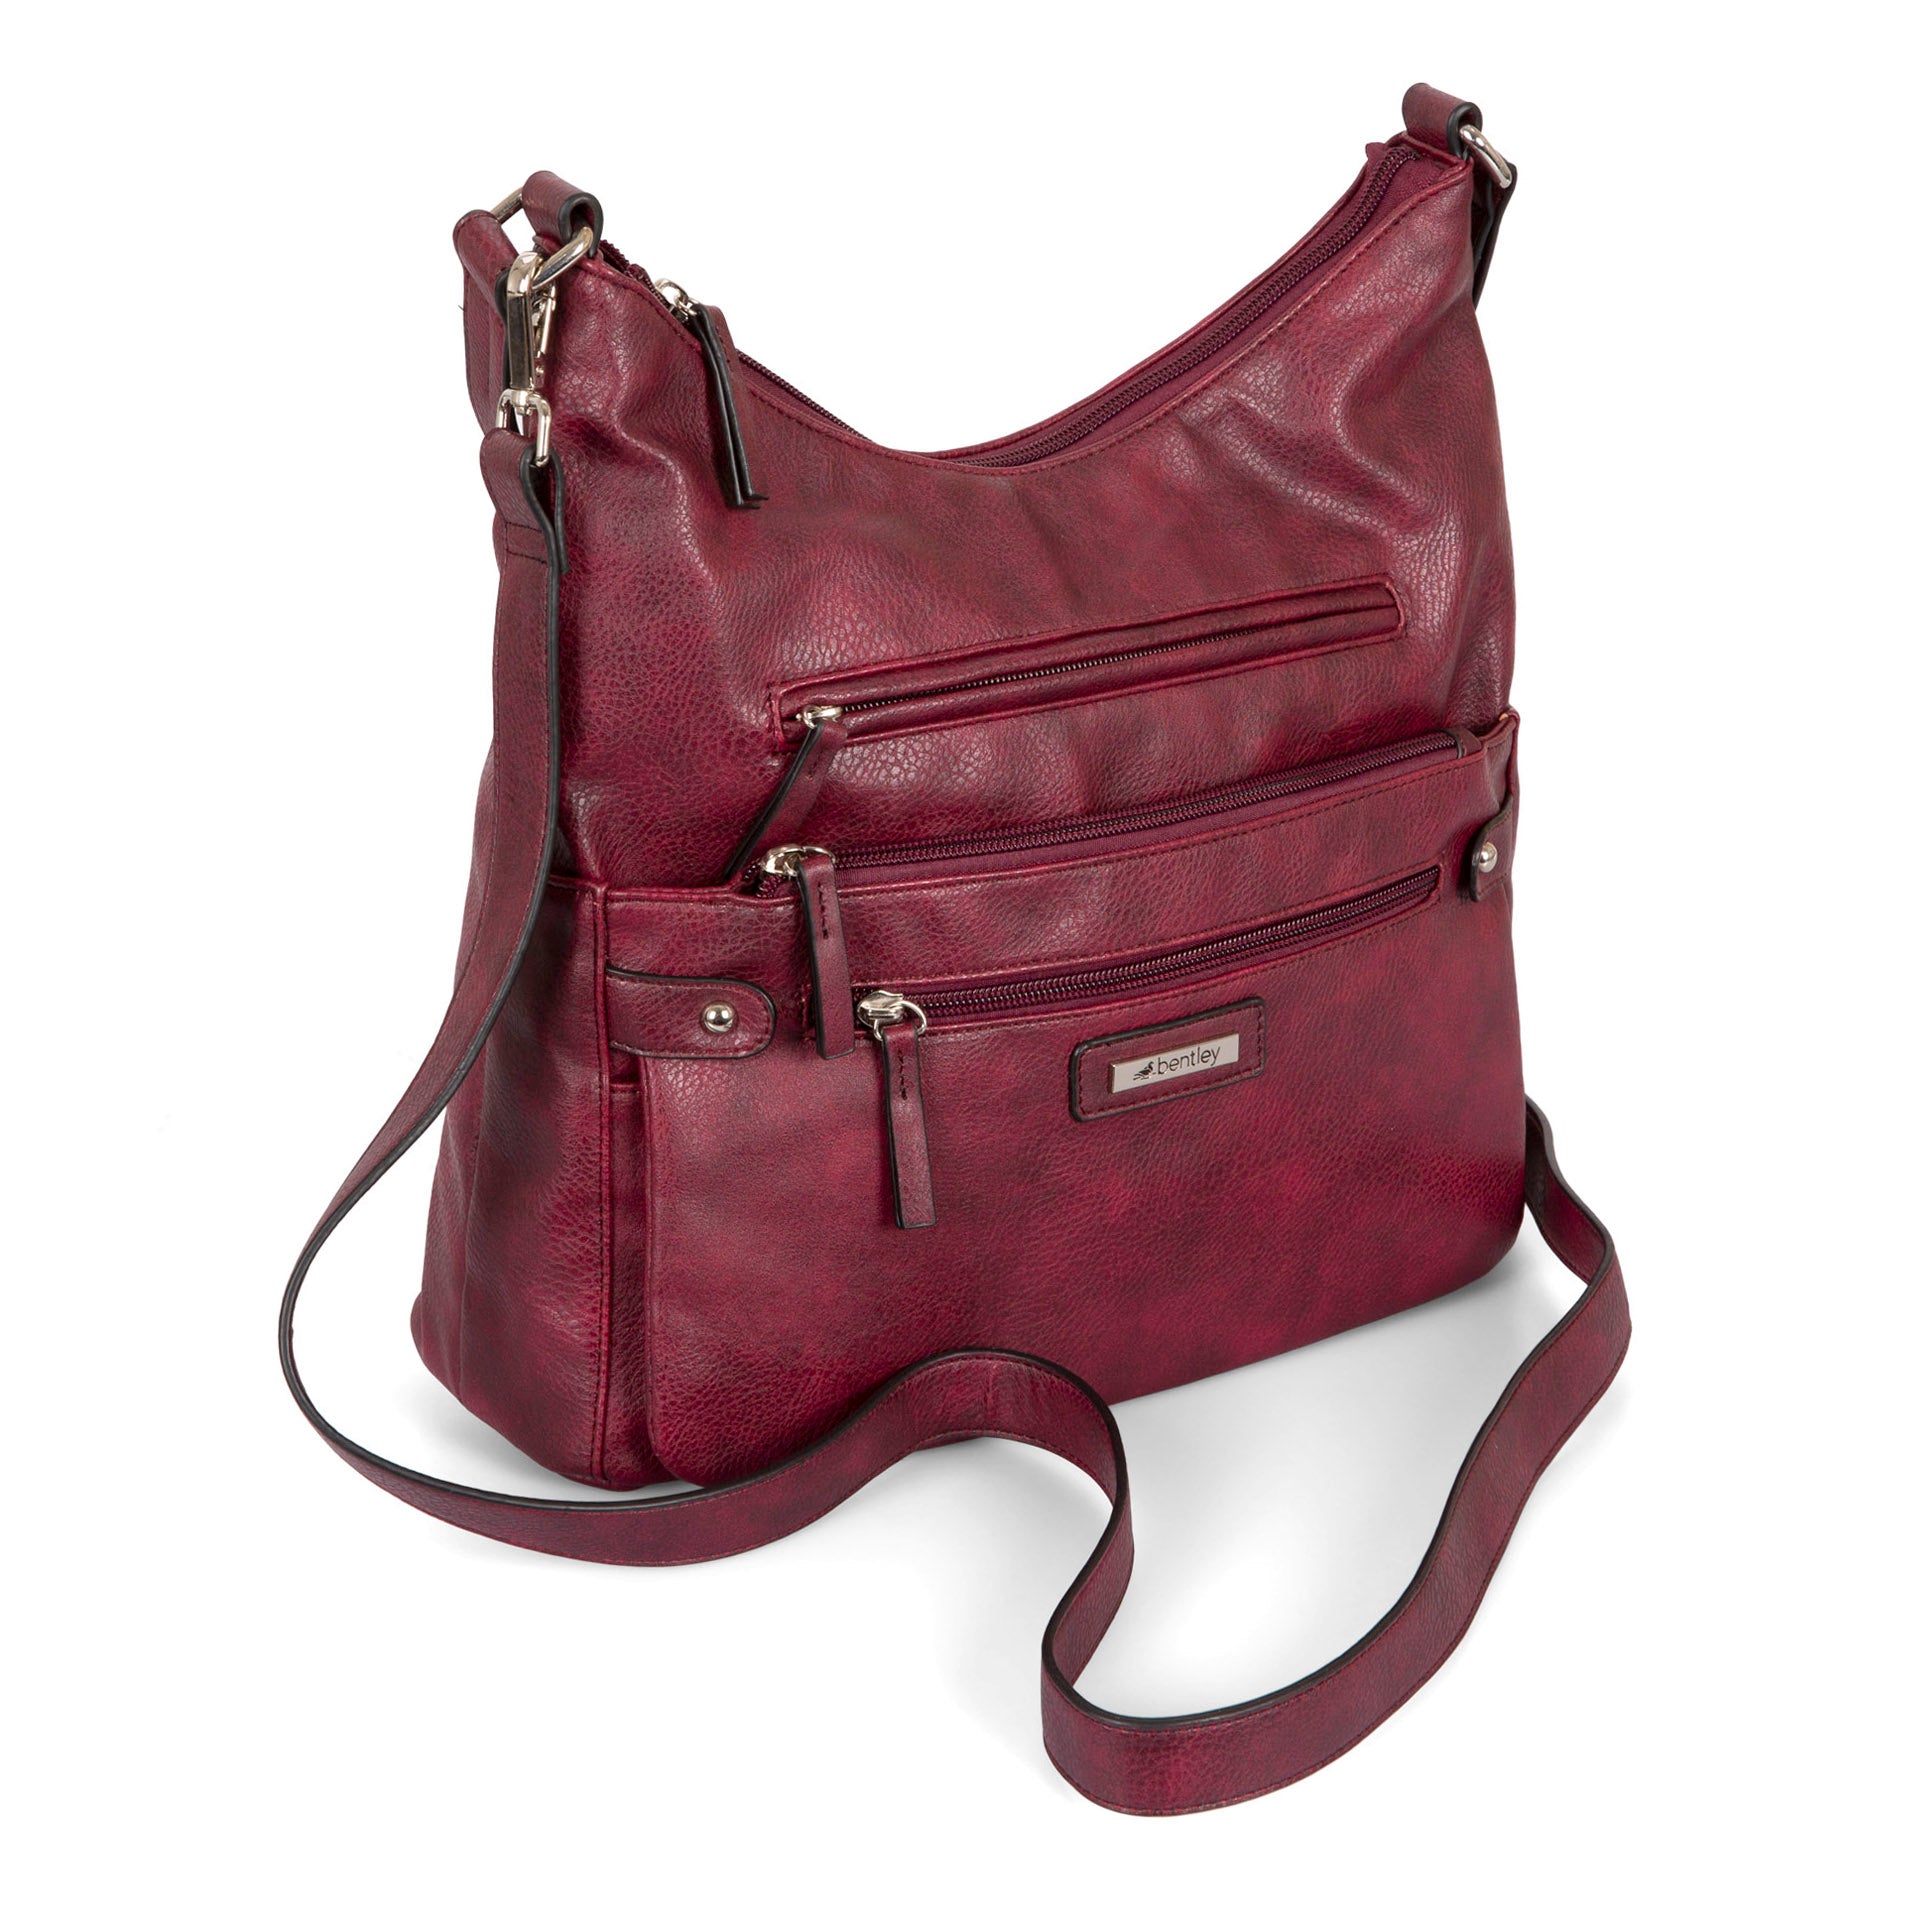 Roma conceal and carry Hobo style purse | www.theconservative.online